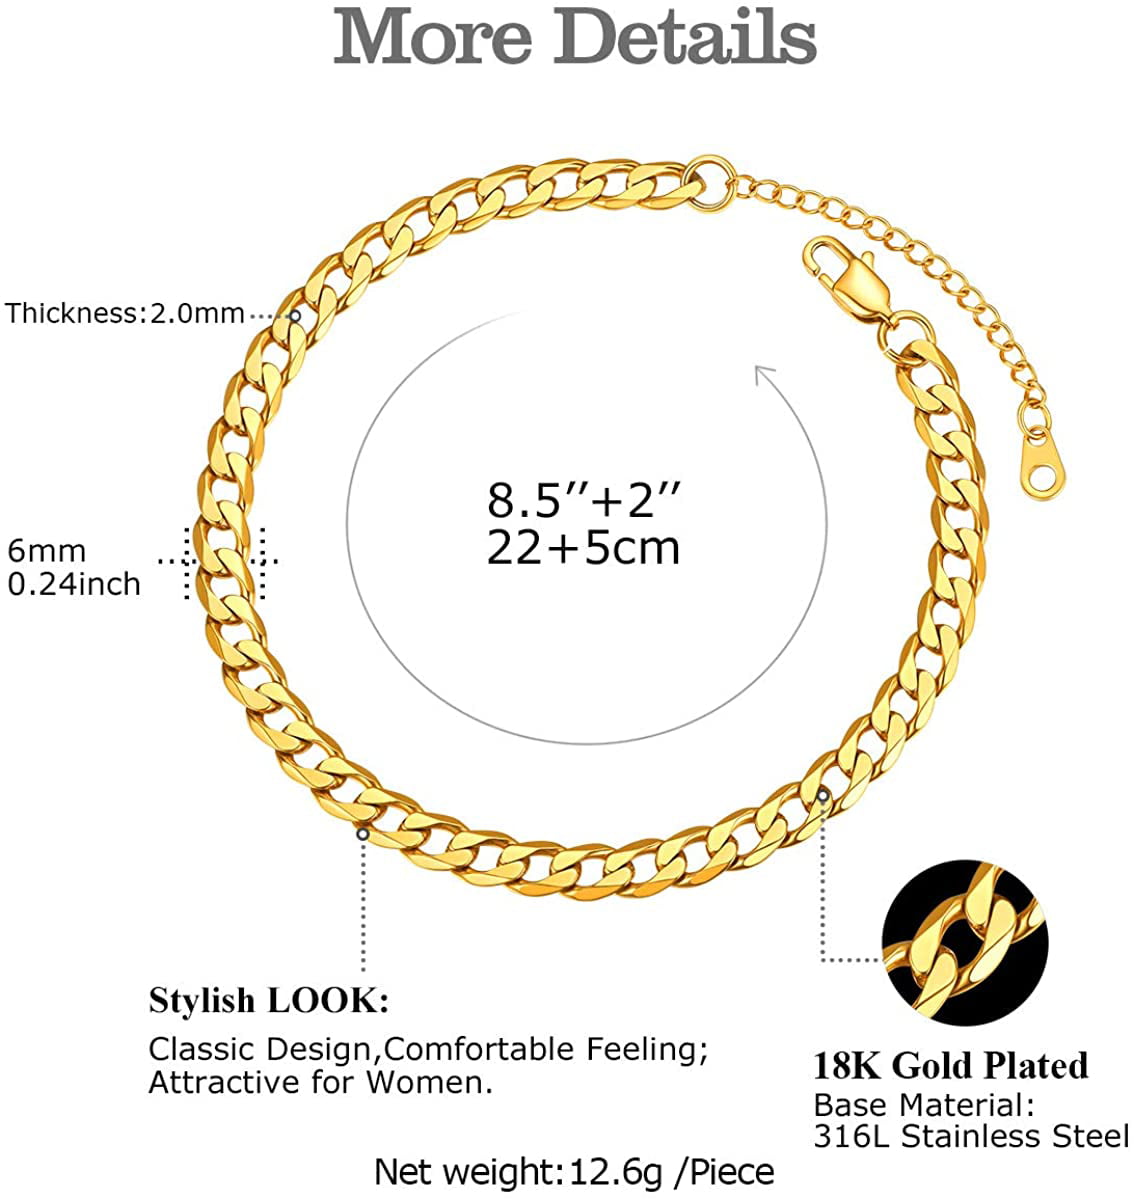 FOCALOOK Stainless Steel Gold 3mm/6mm Chain Anklet for Women Men Fashion Ankle Bracelet Figaro/Cuban/Twist/Rope Chain Foot Jewelry with Extension 